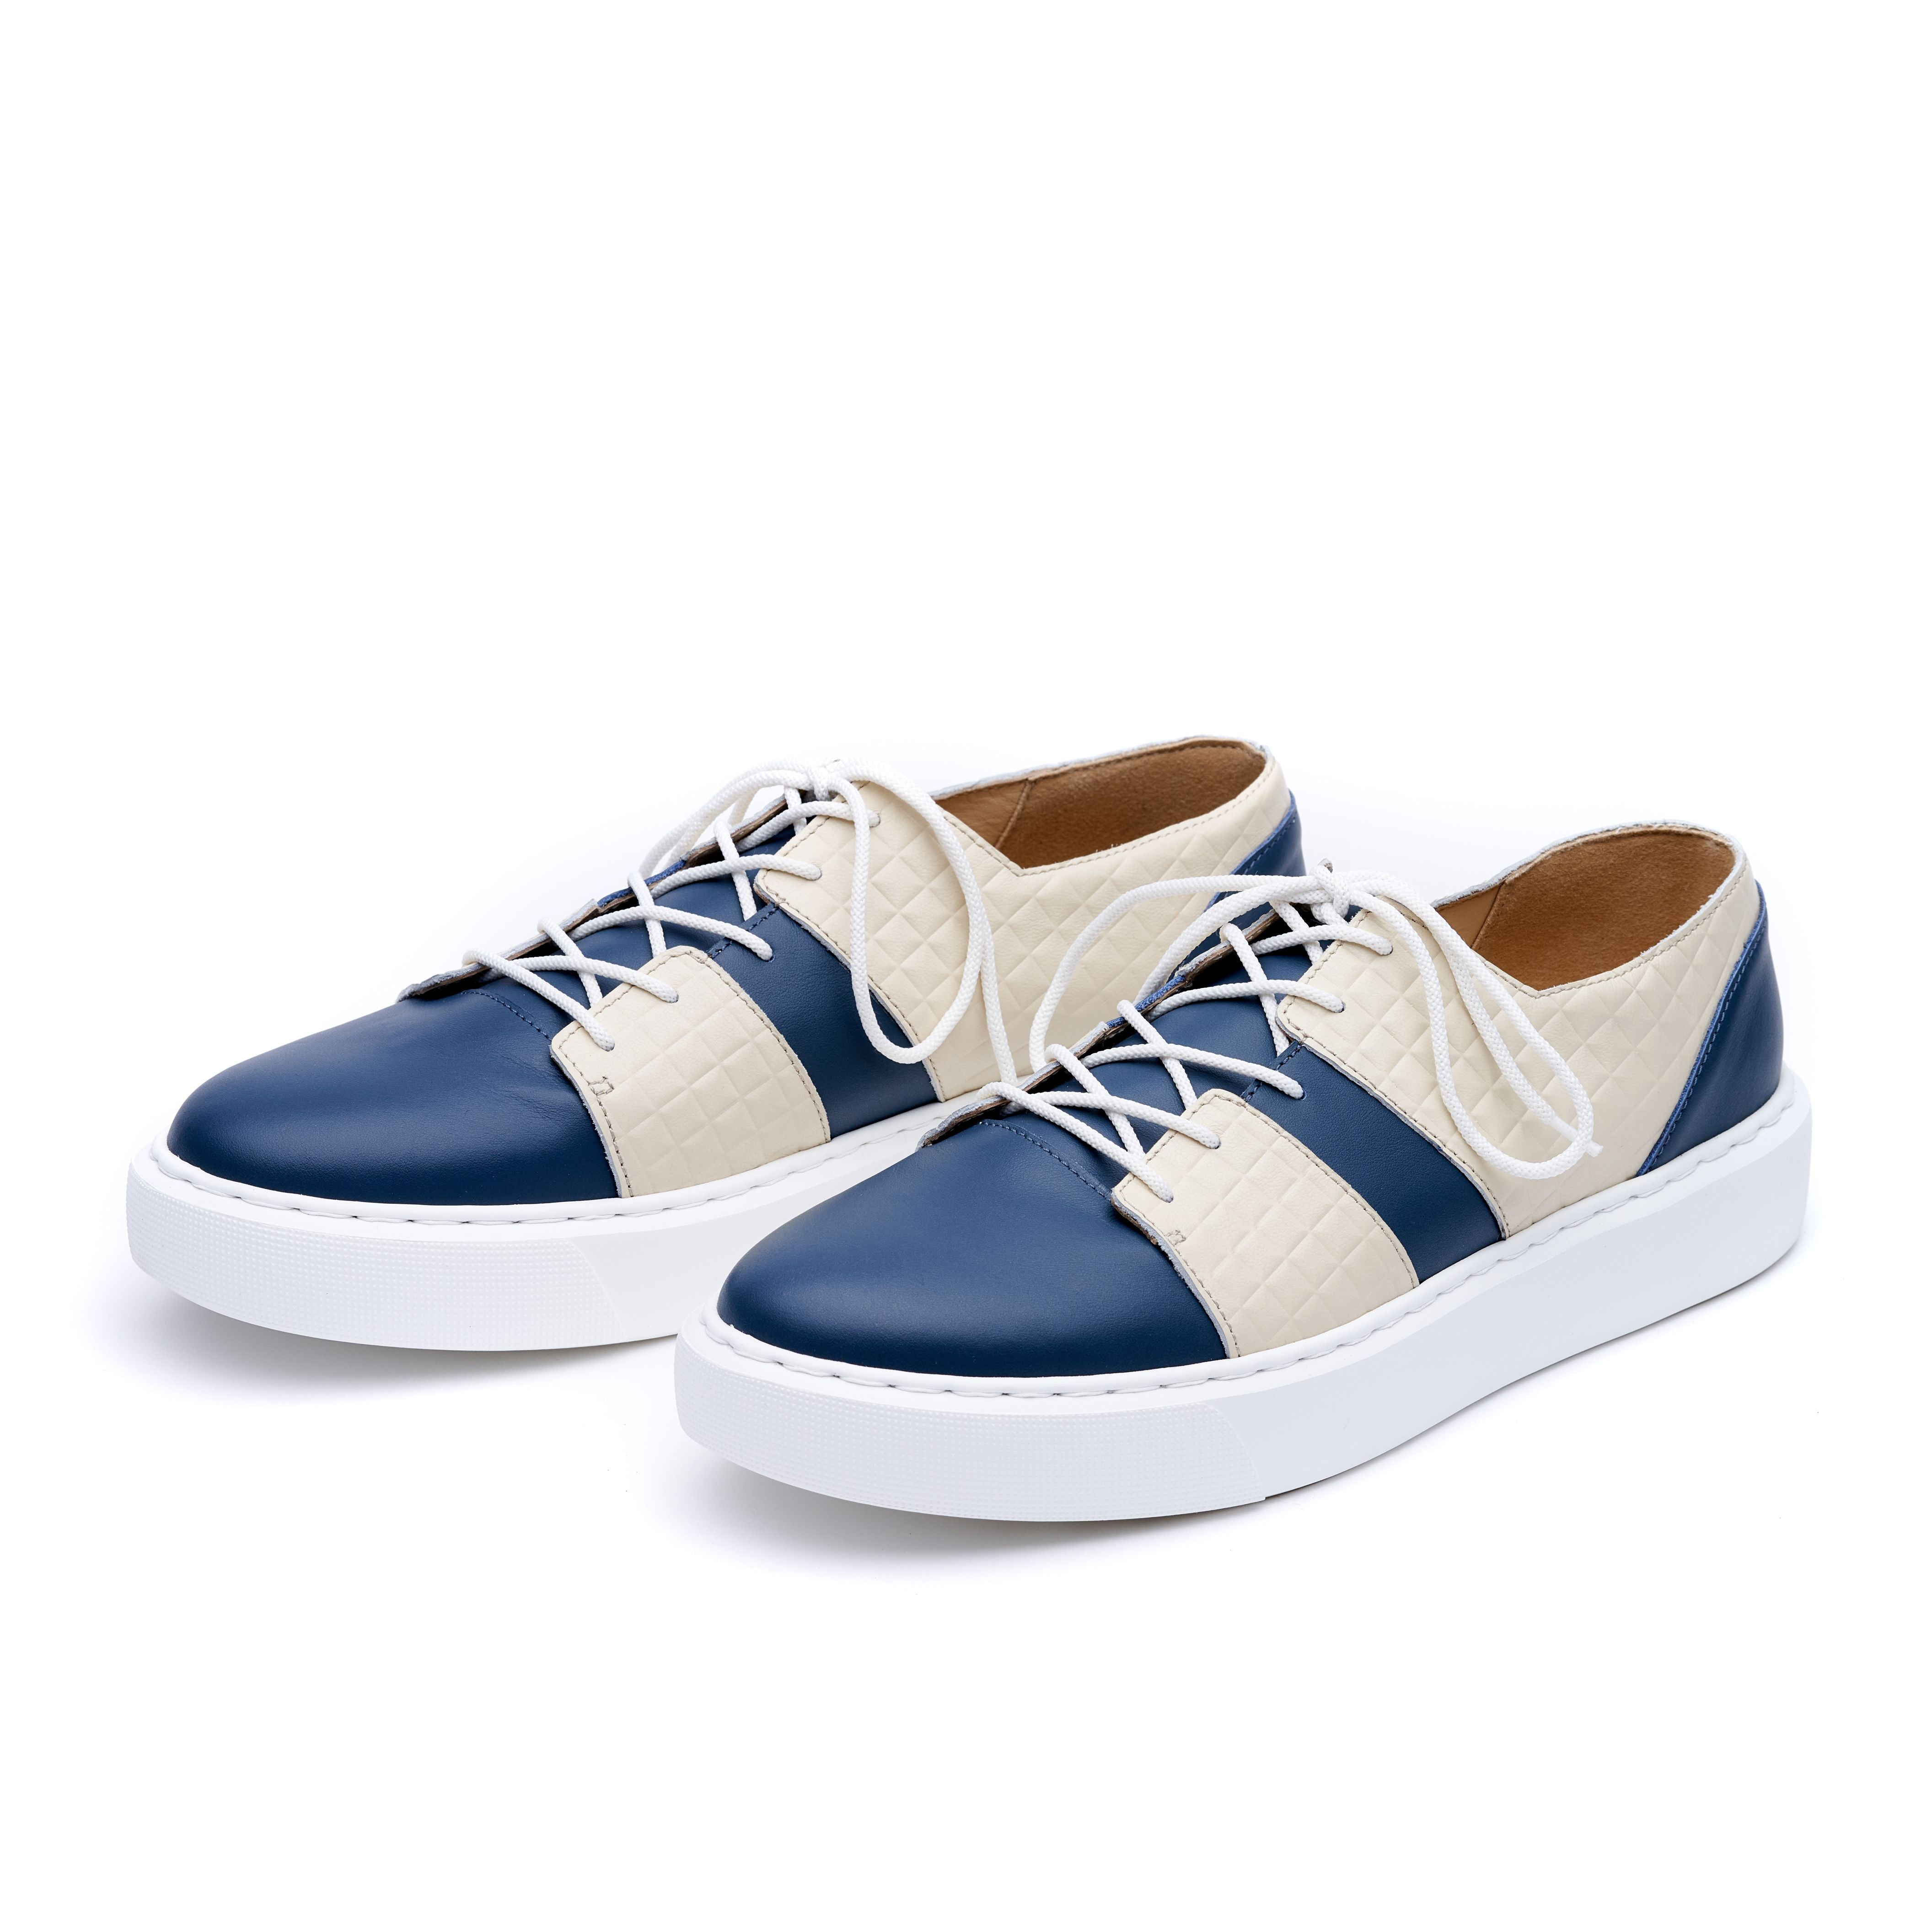 Men’s Neutrals / Blue Blue And Off White Leather Sneakers 10 Uk Mas Laus